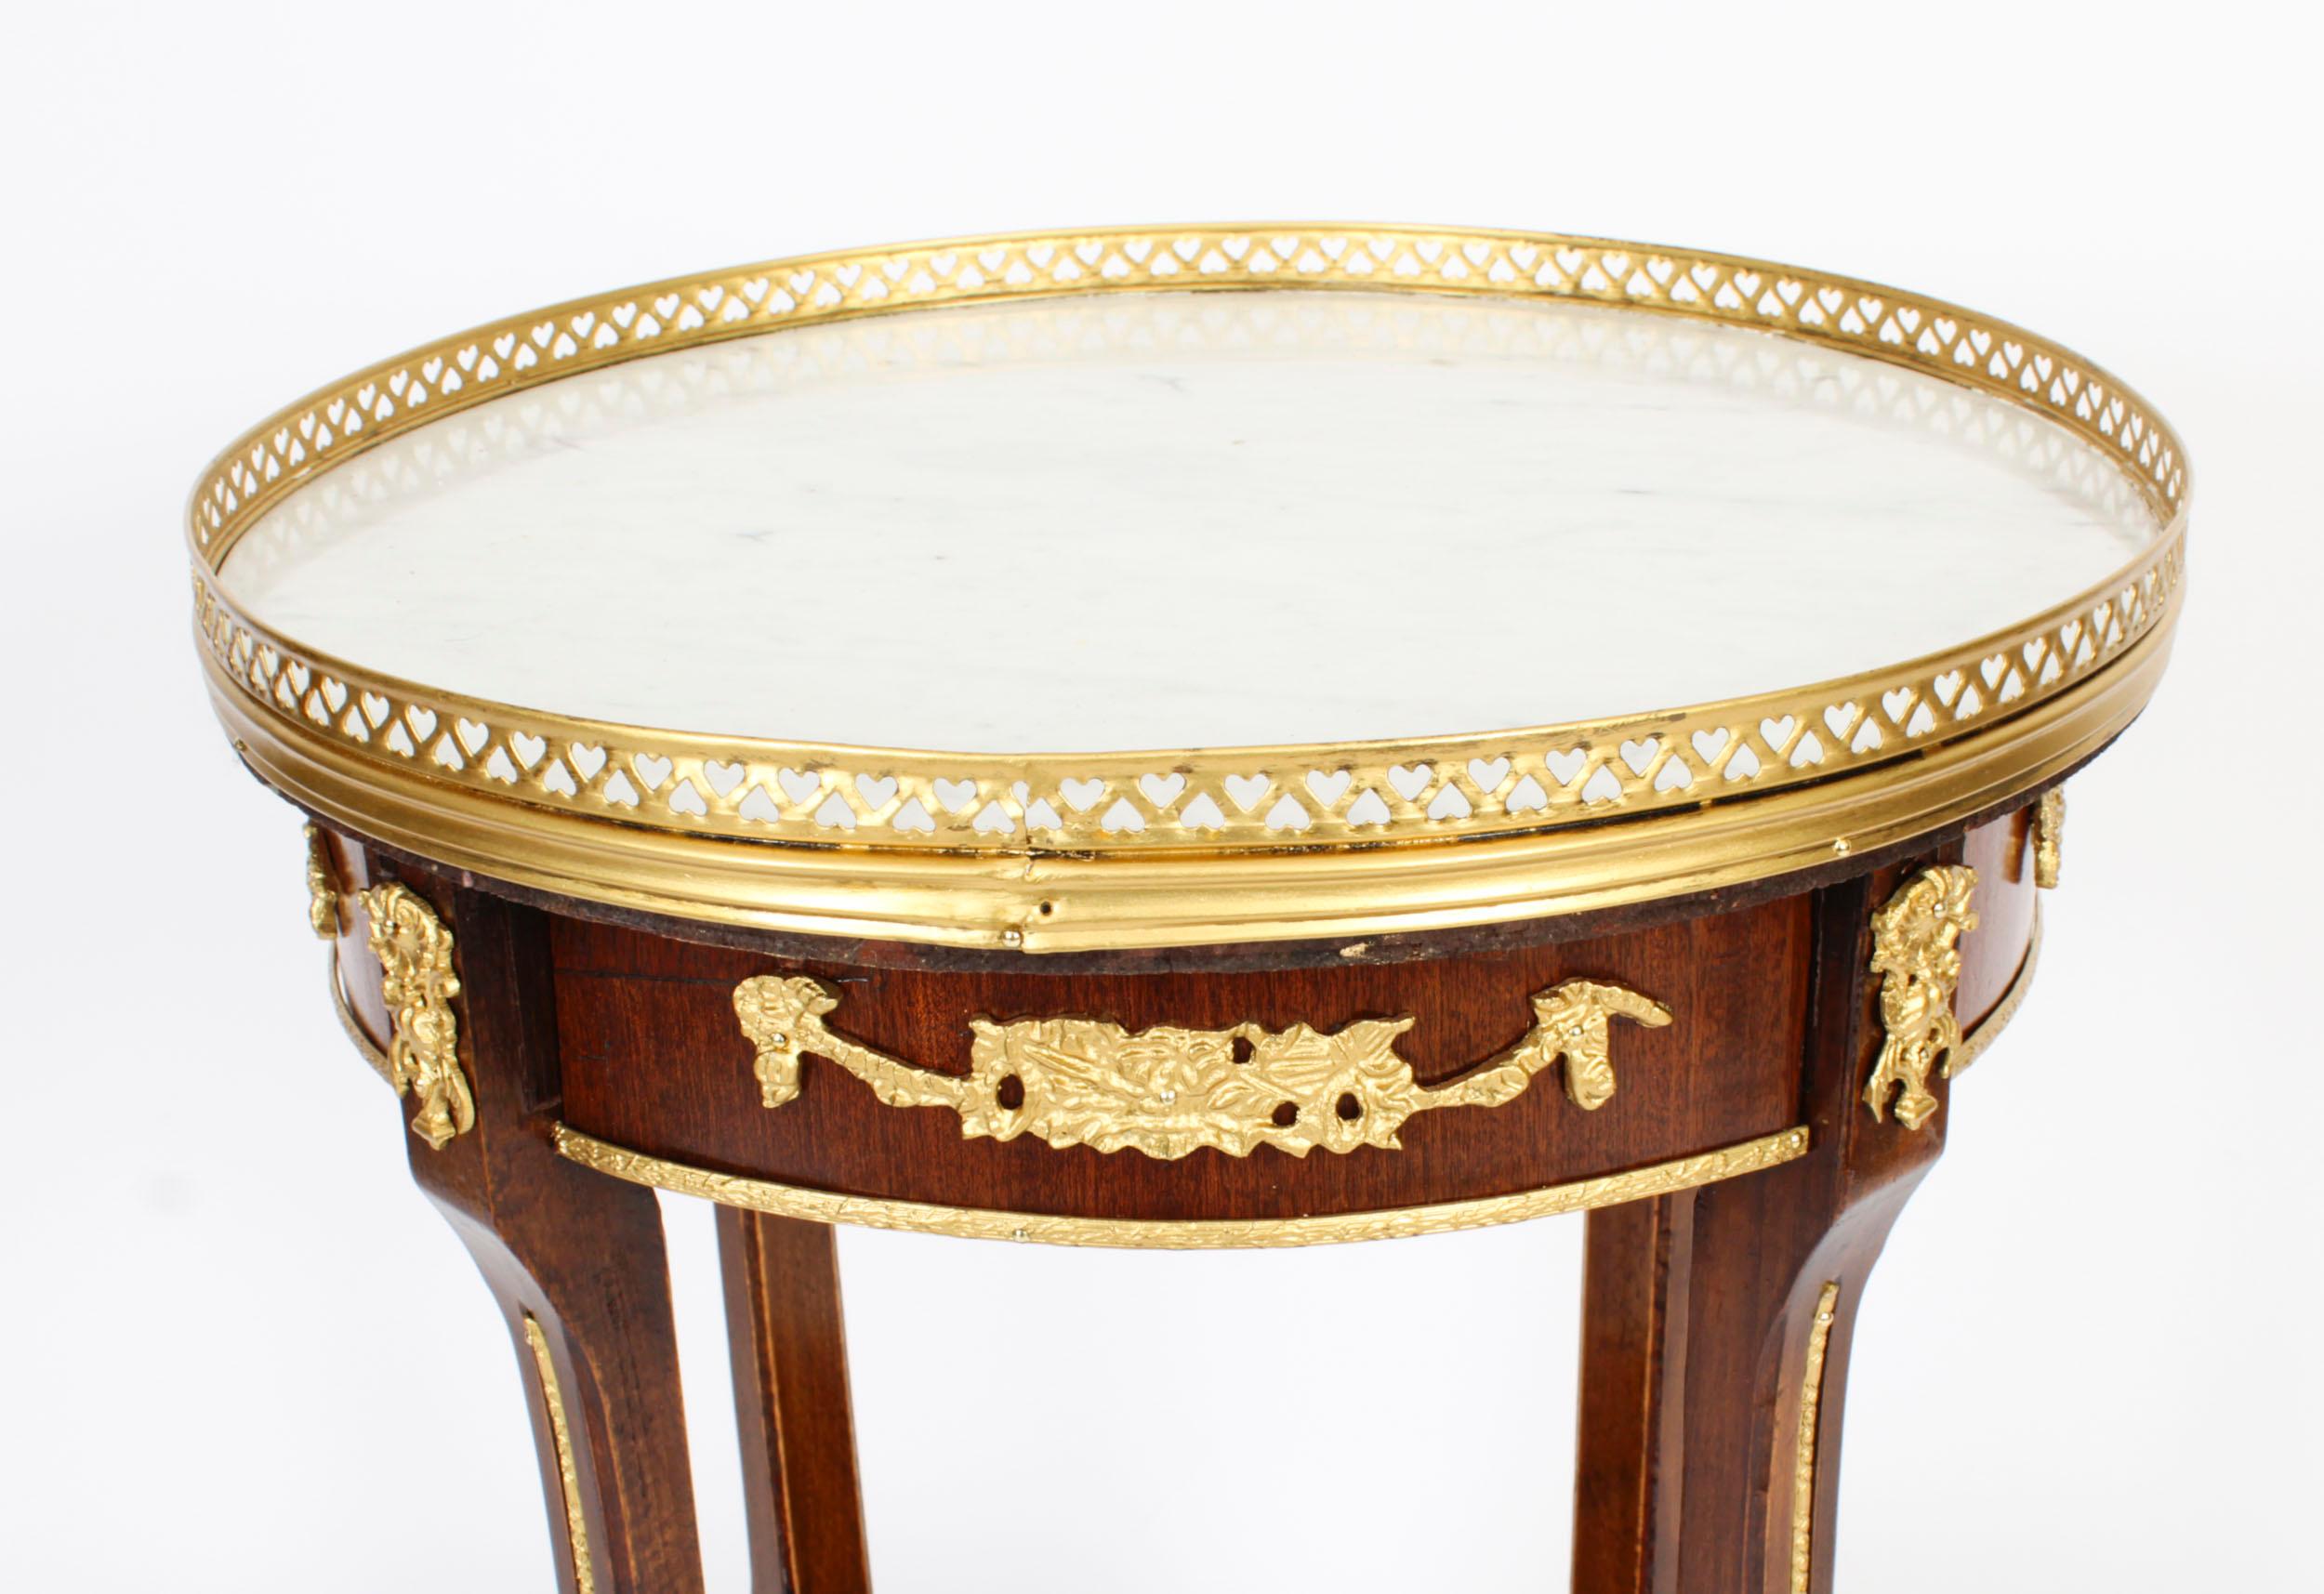 Antique French Empire Marble & Ormolu Occasional Table, 19th Century For Sale 3